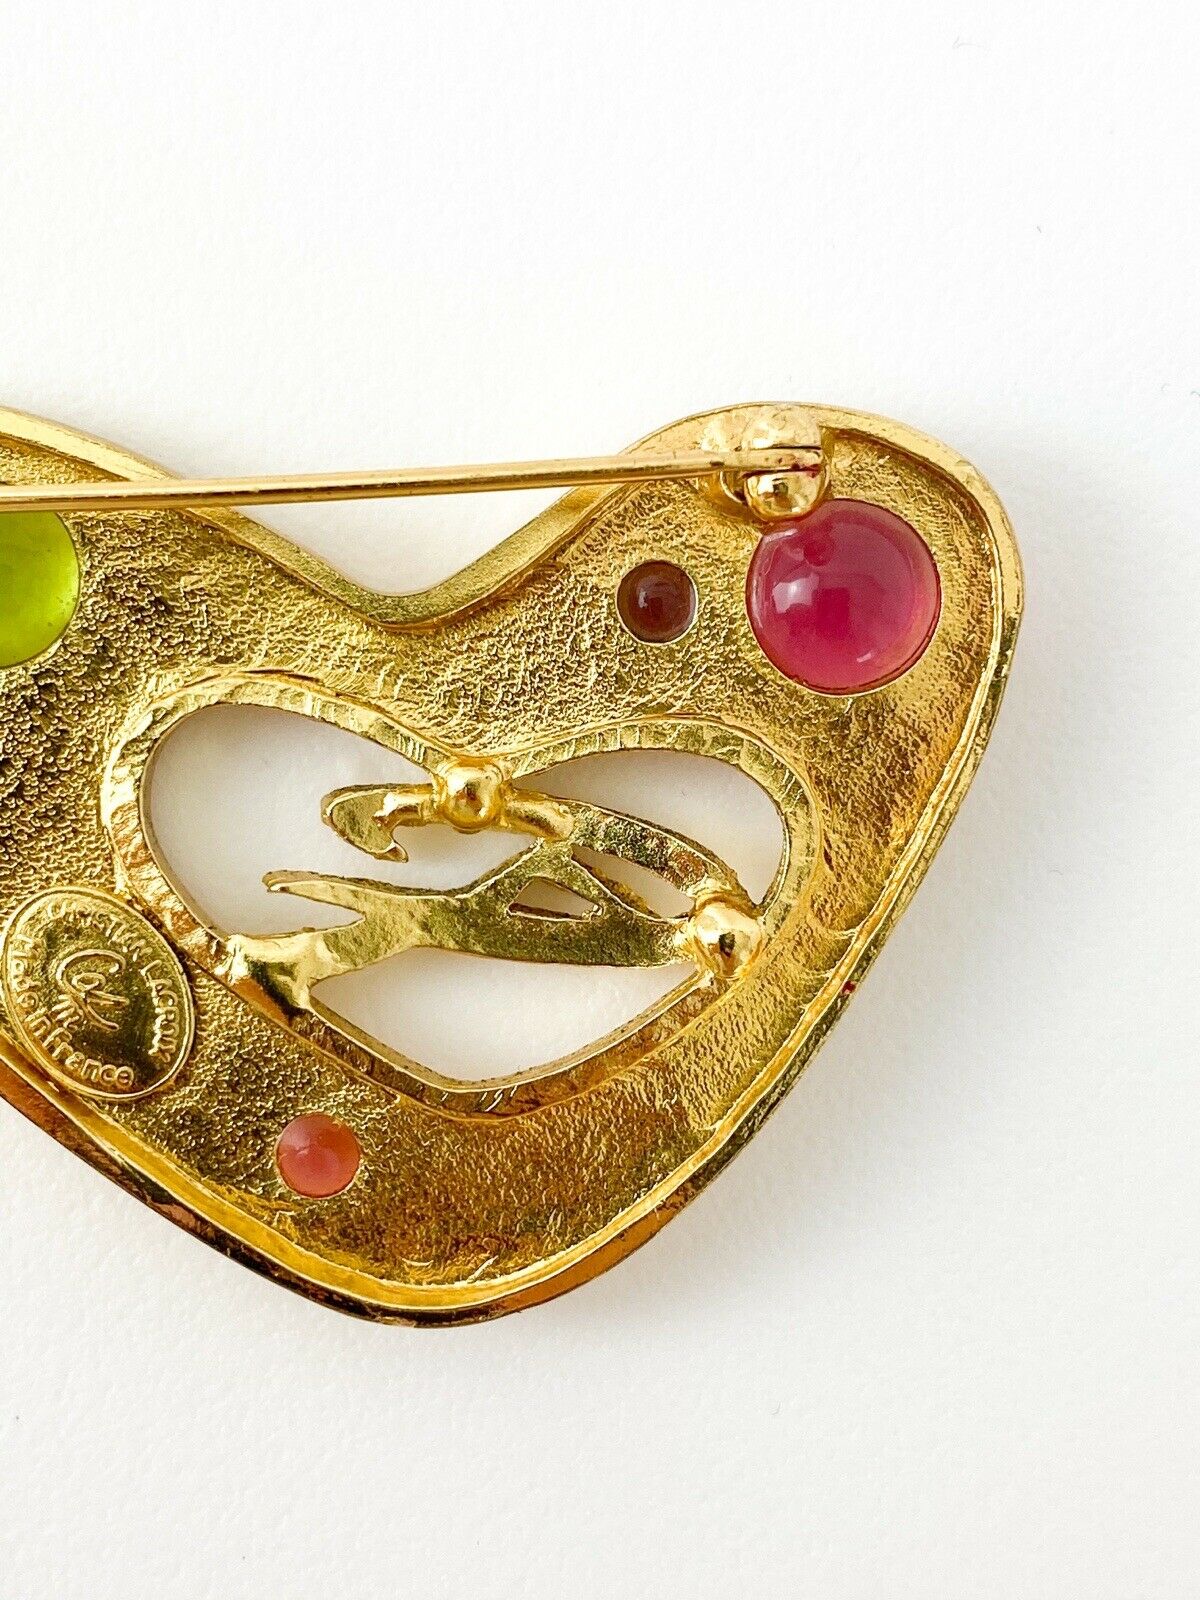 Christian Lacroix Vintage Gold Tone Heart Brooch Pin Made in France